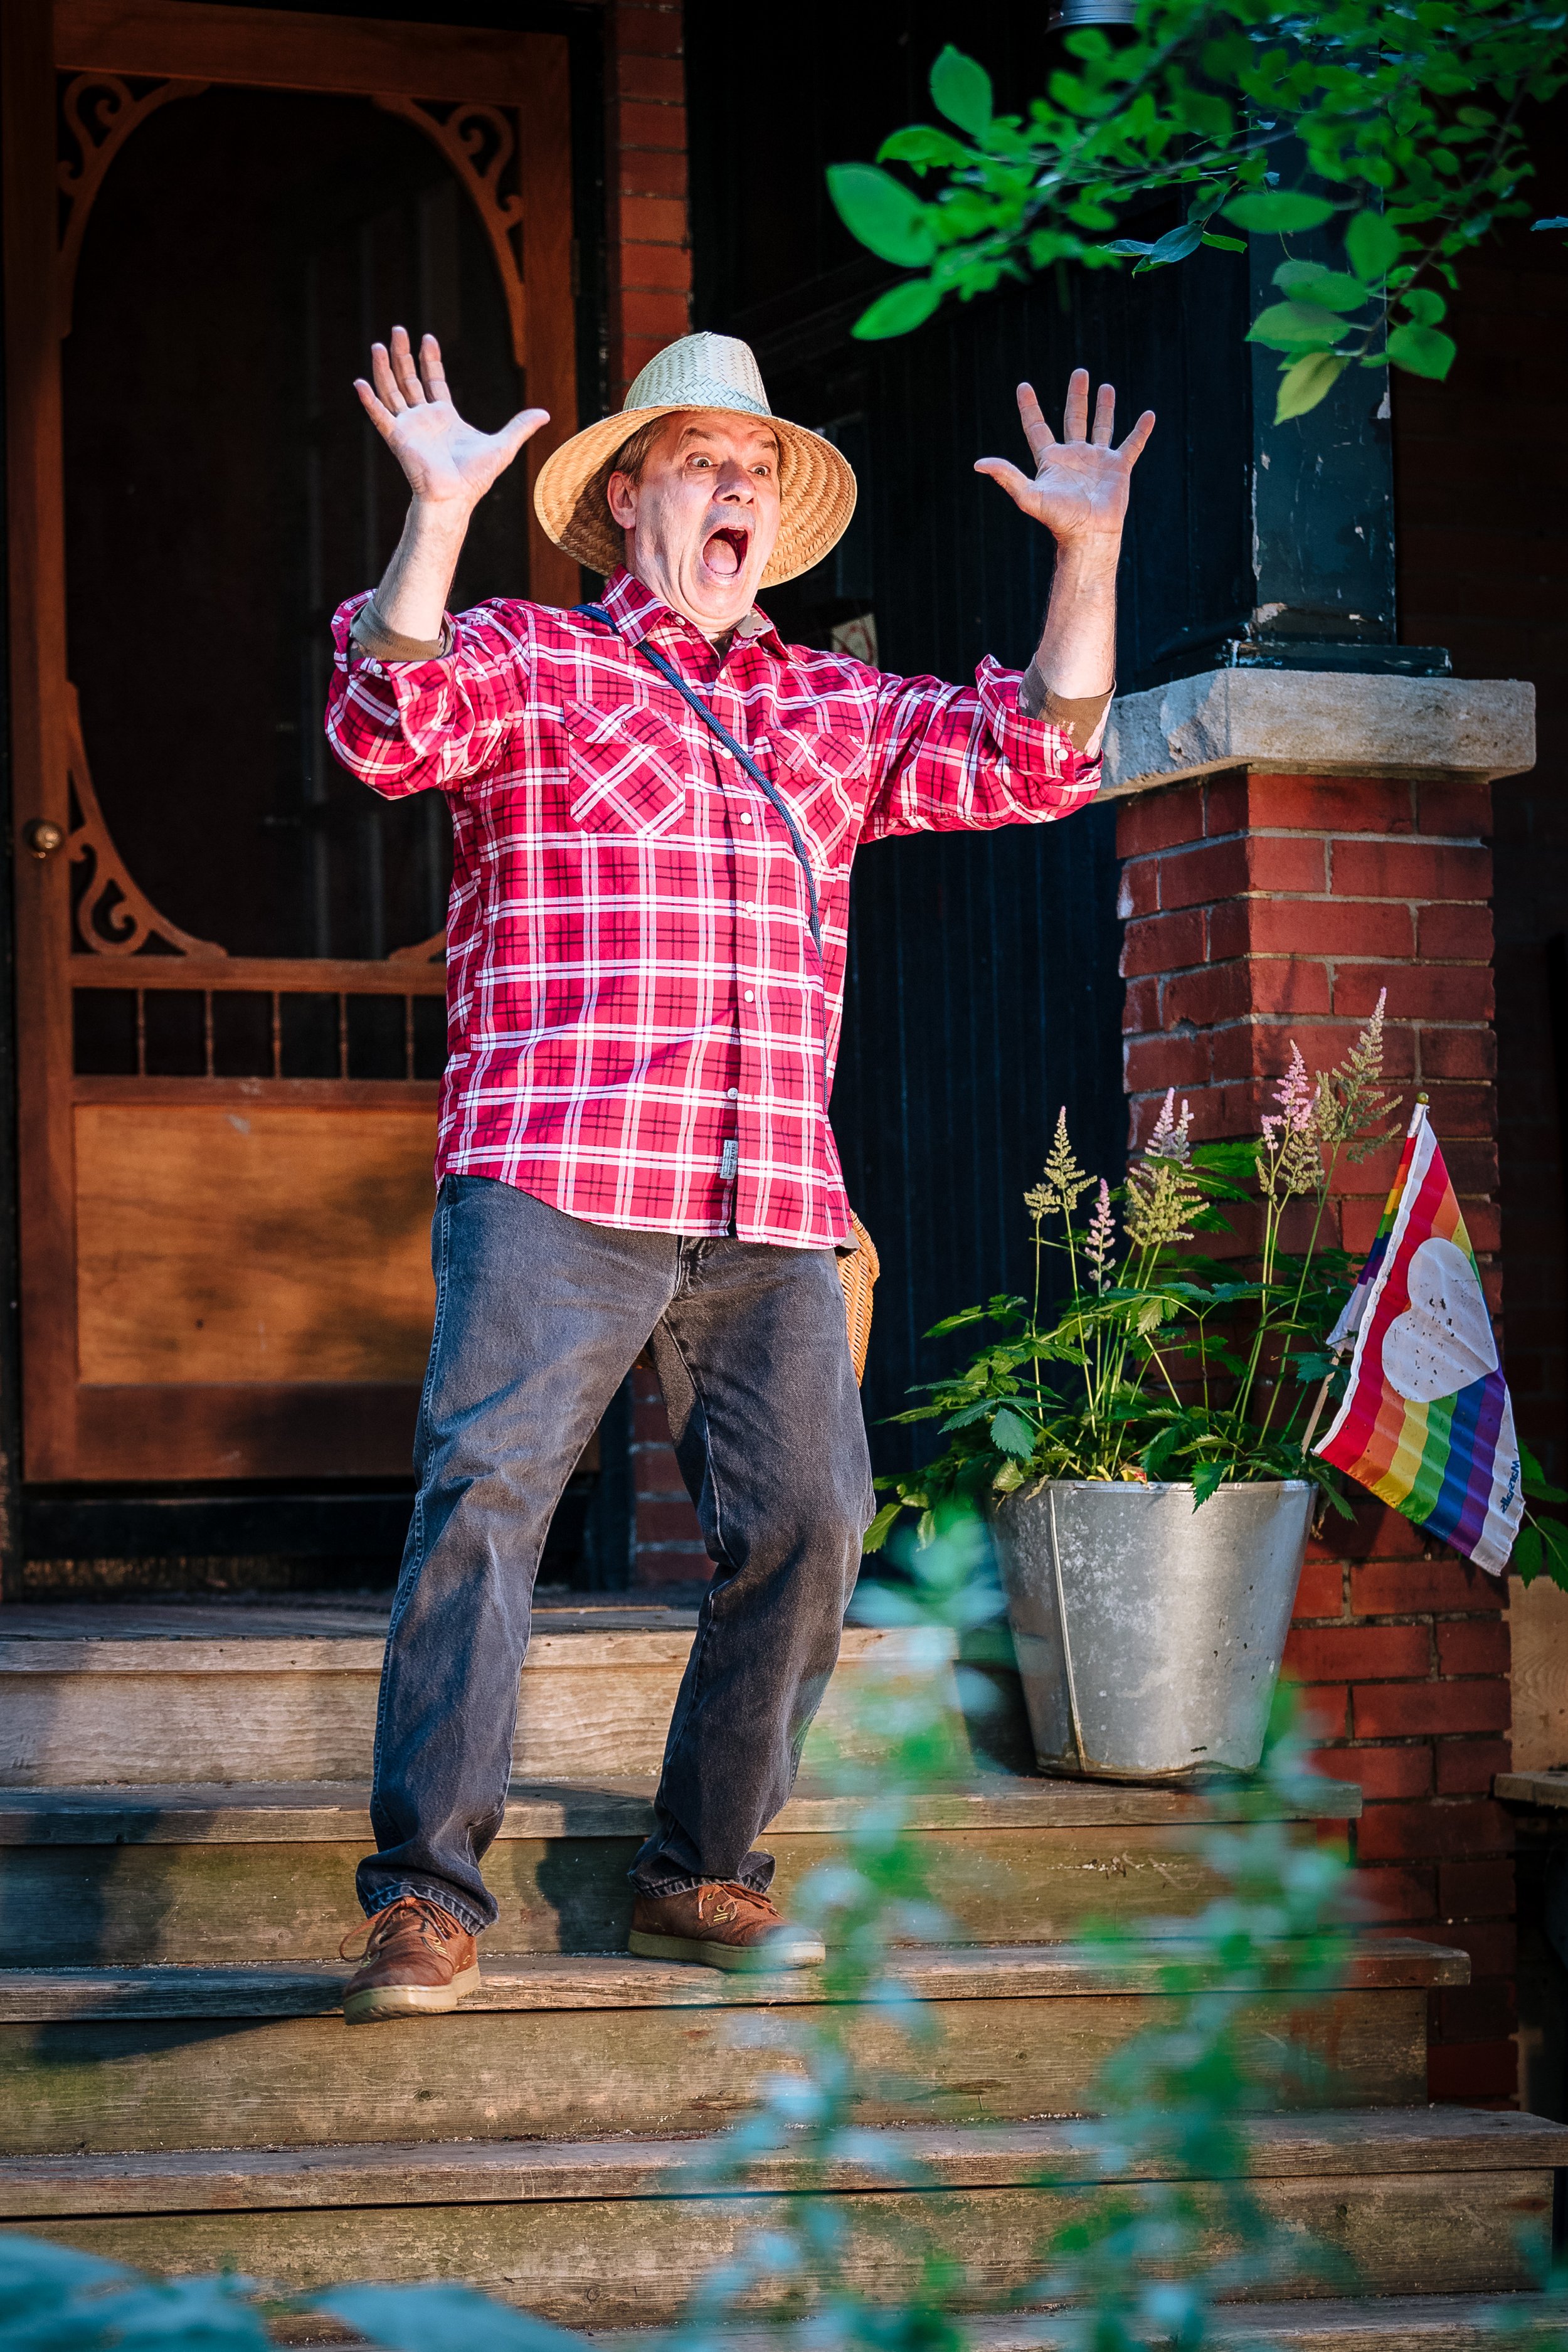 Man in a straw hat stands on the stairs, with loud expression on his face